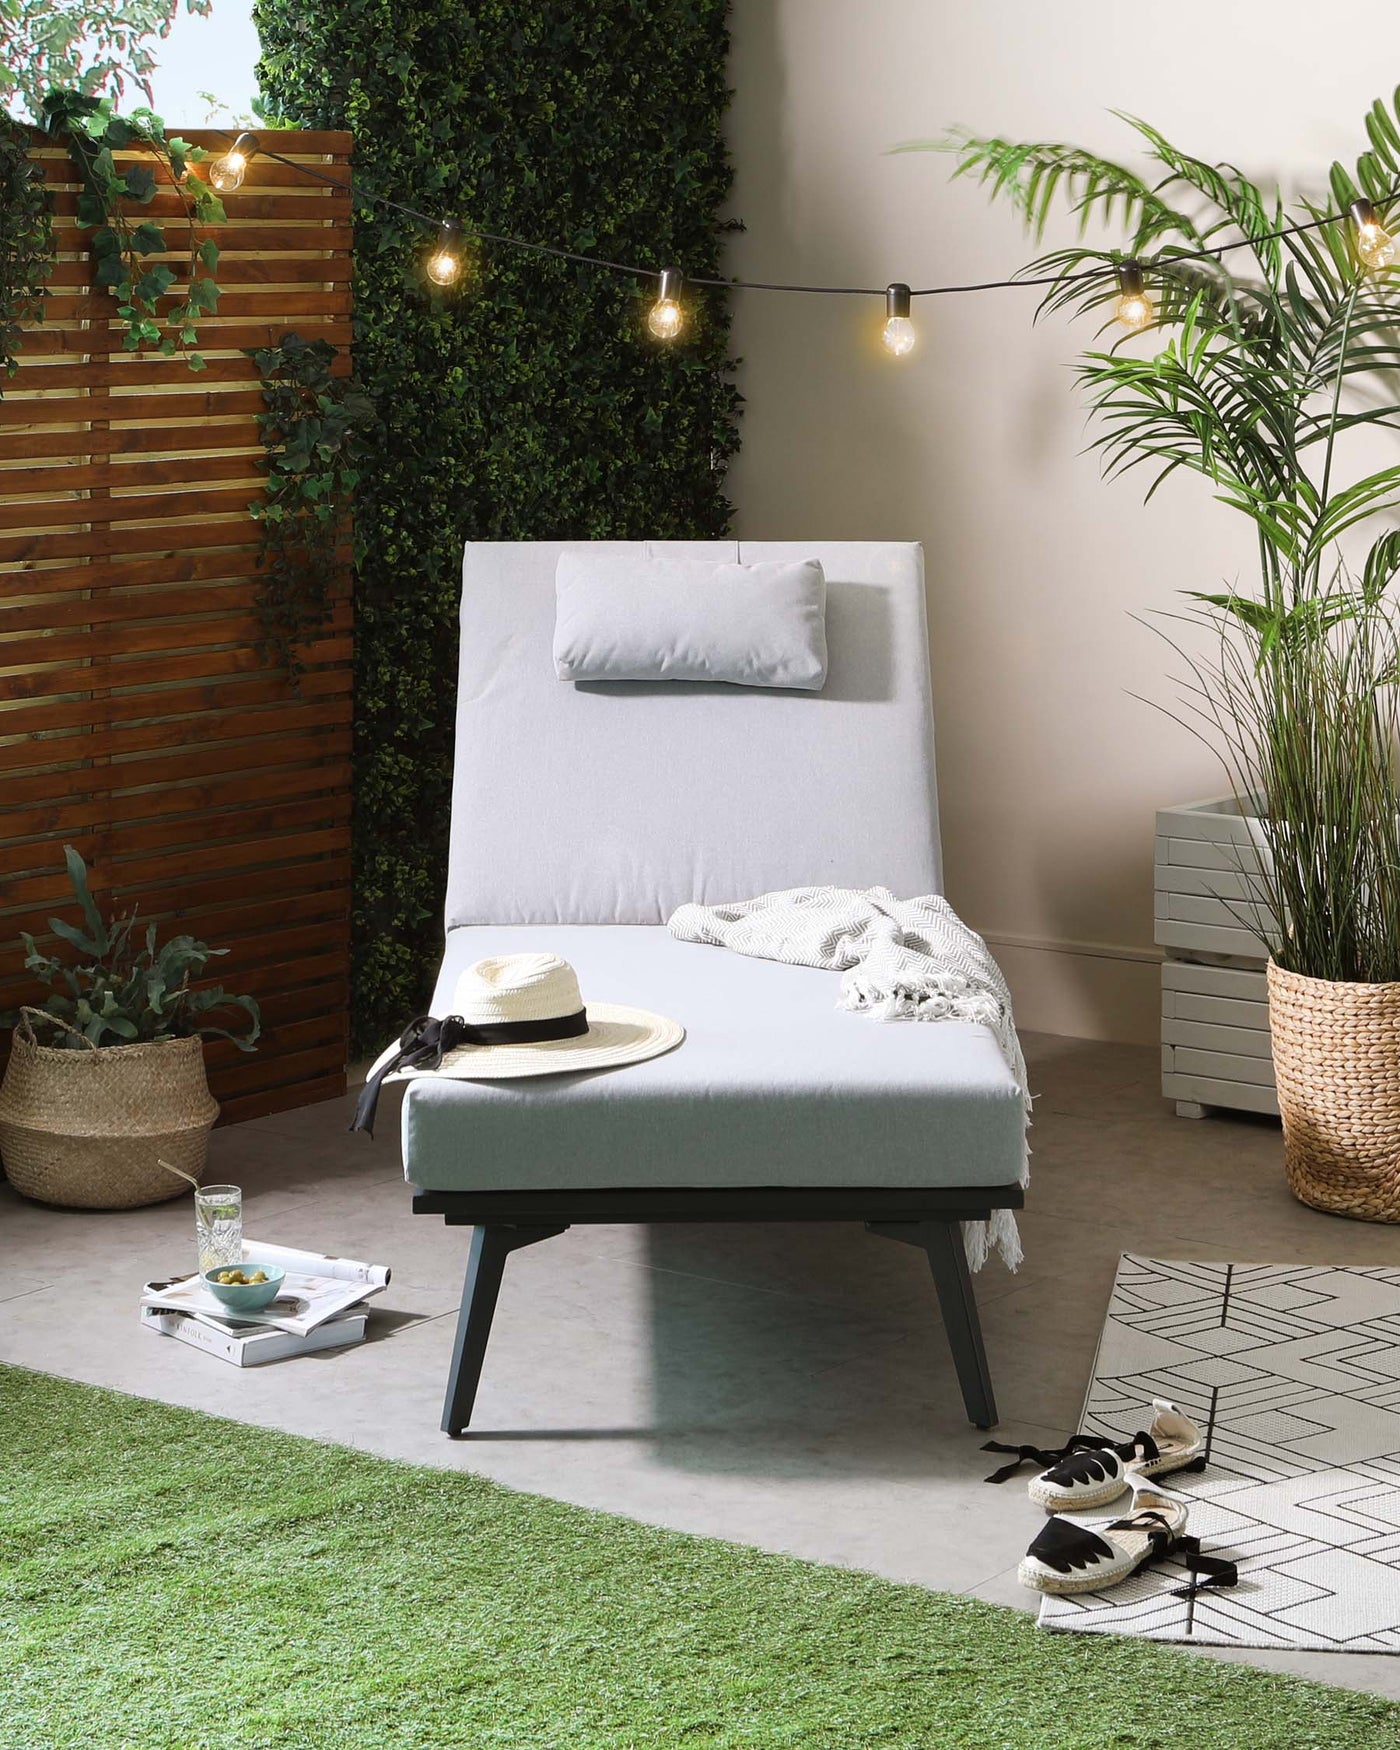 Modern outdoor chaise lounge with a light grey cushion and simple pillow on a sleek, black metal frame, accompanied by a small coordinating side table. The setting is complemented by decorative string lights, potted plants, a woven basket, and casual décor items for a relaxed patio ambiance.